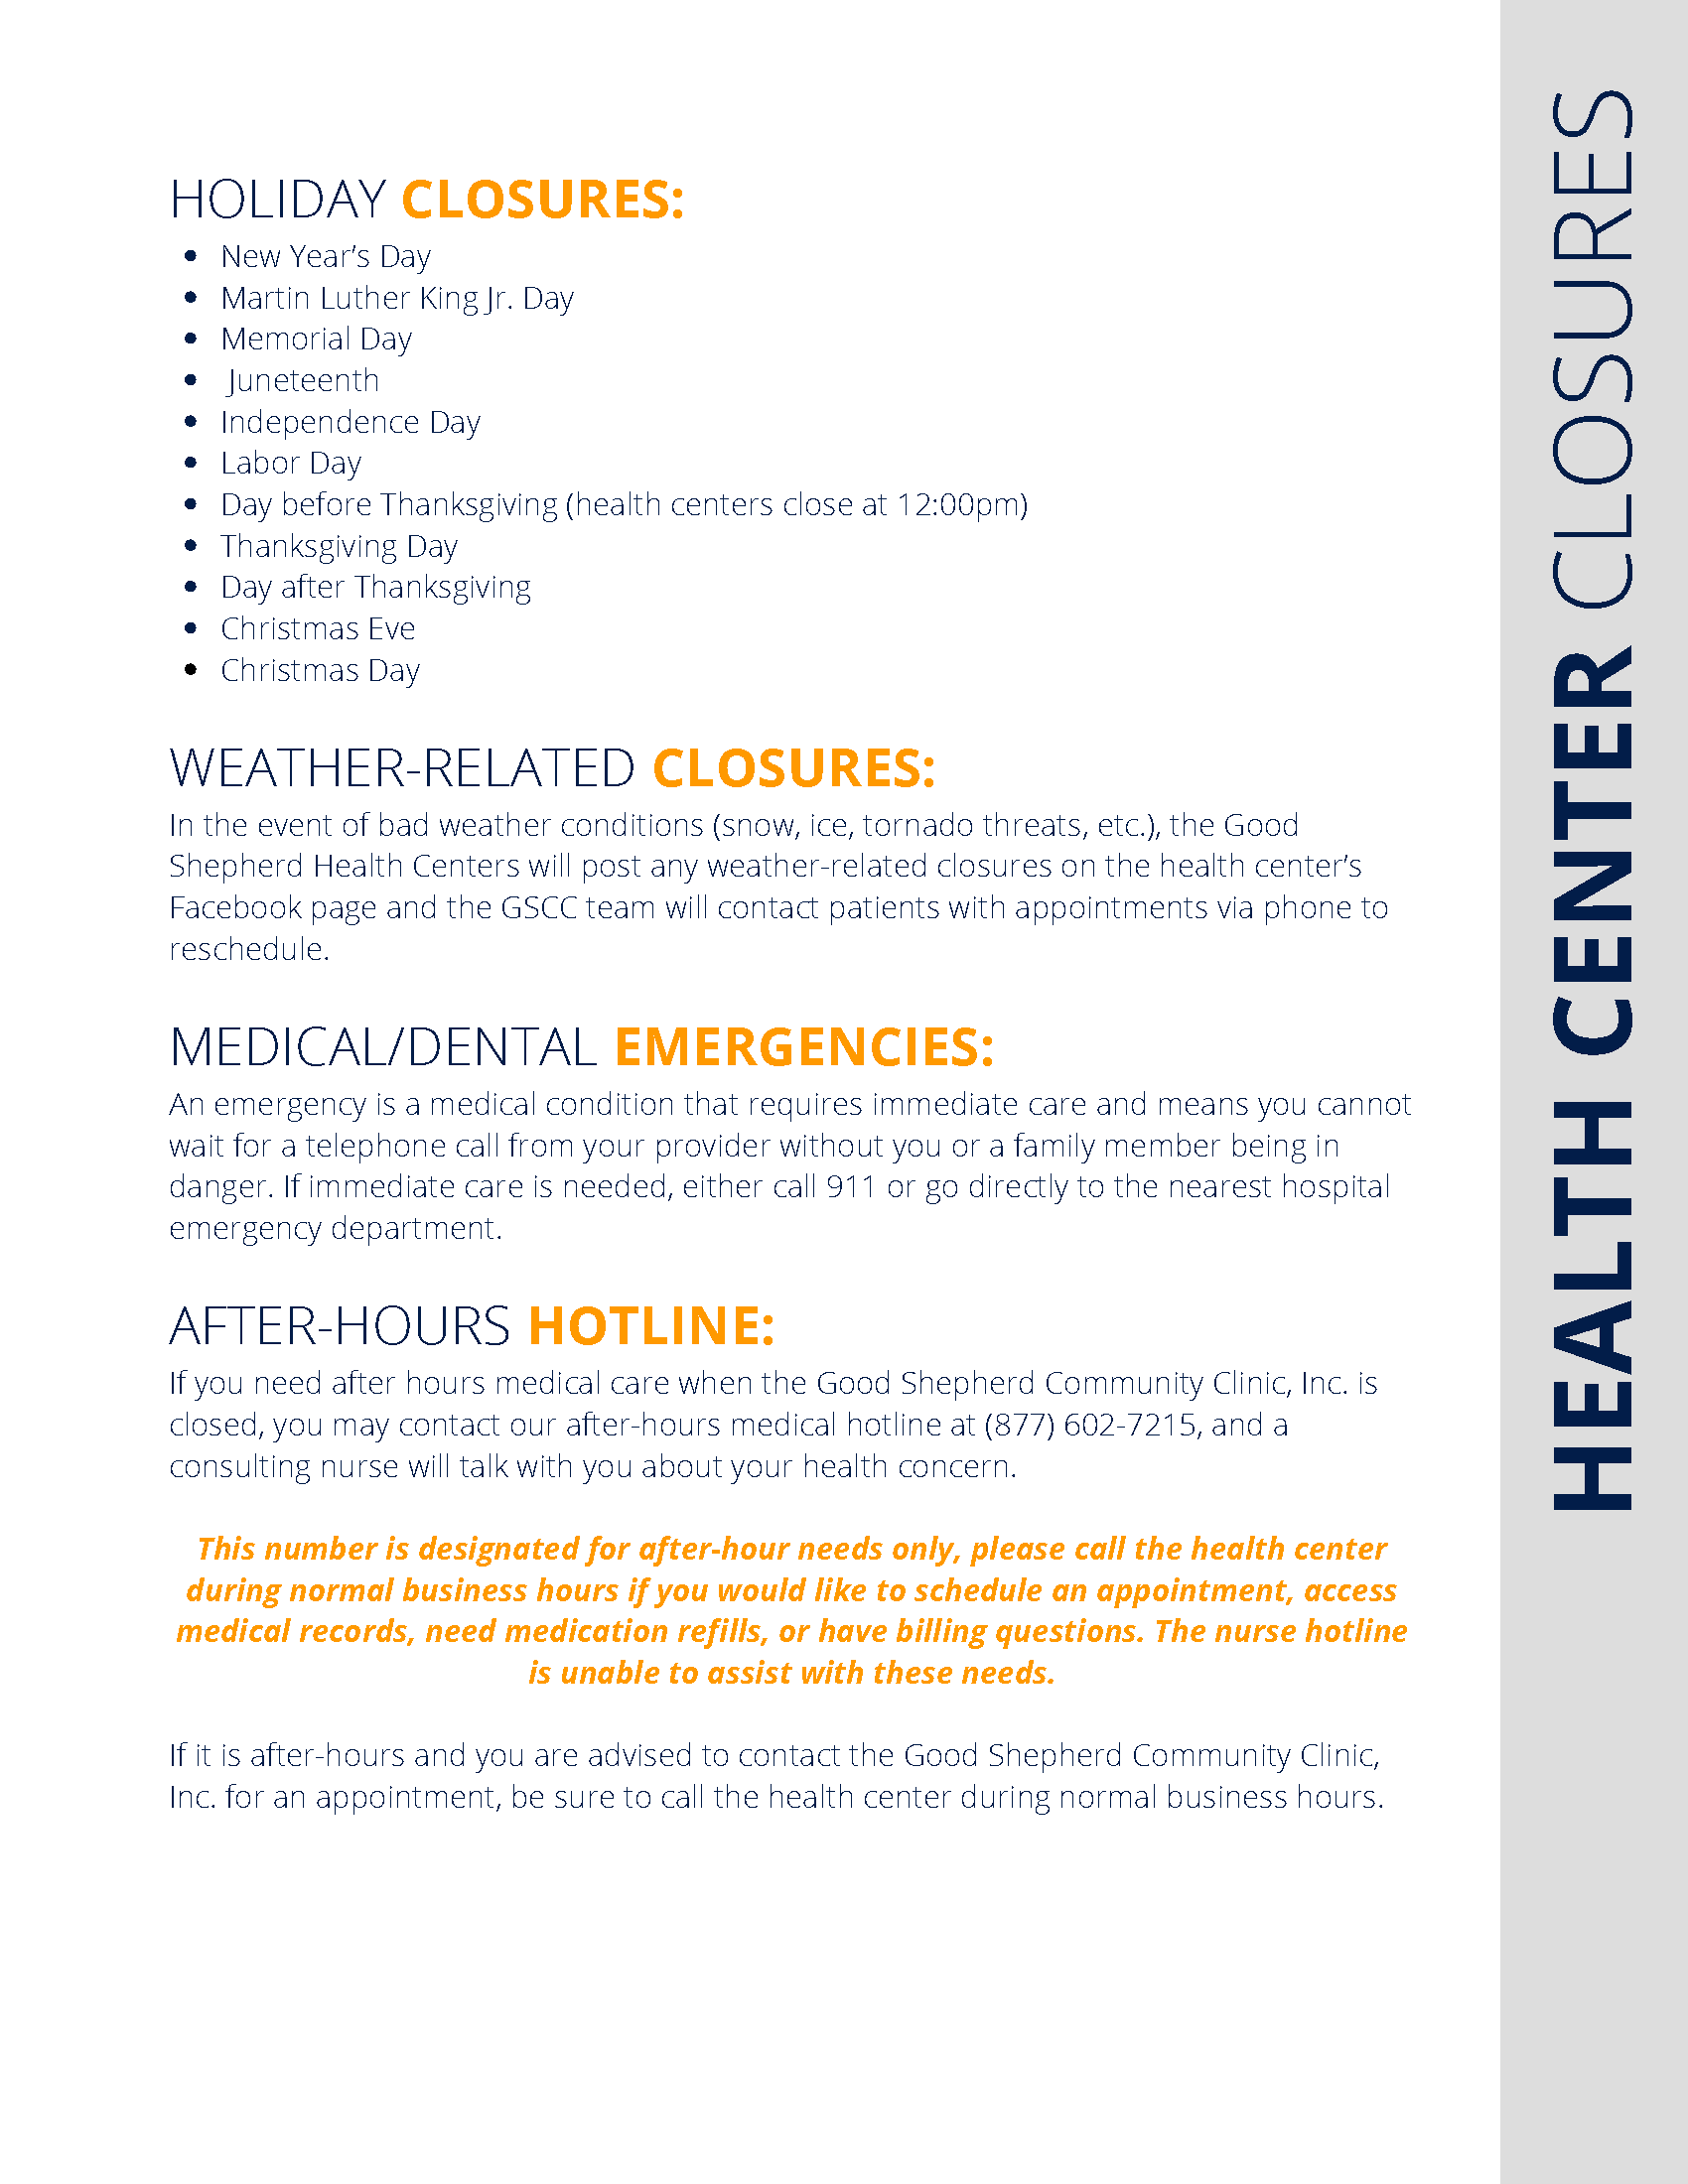 Patient Handbook 10.23 (English)_Page_05.png